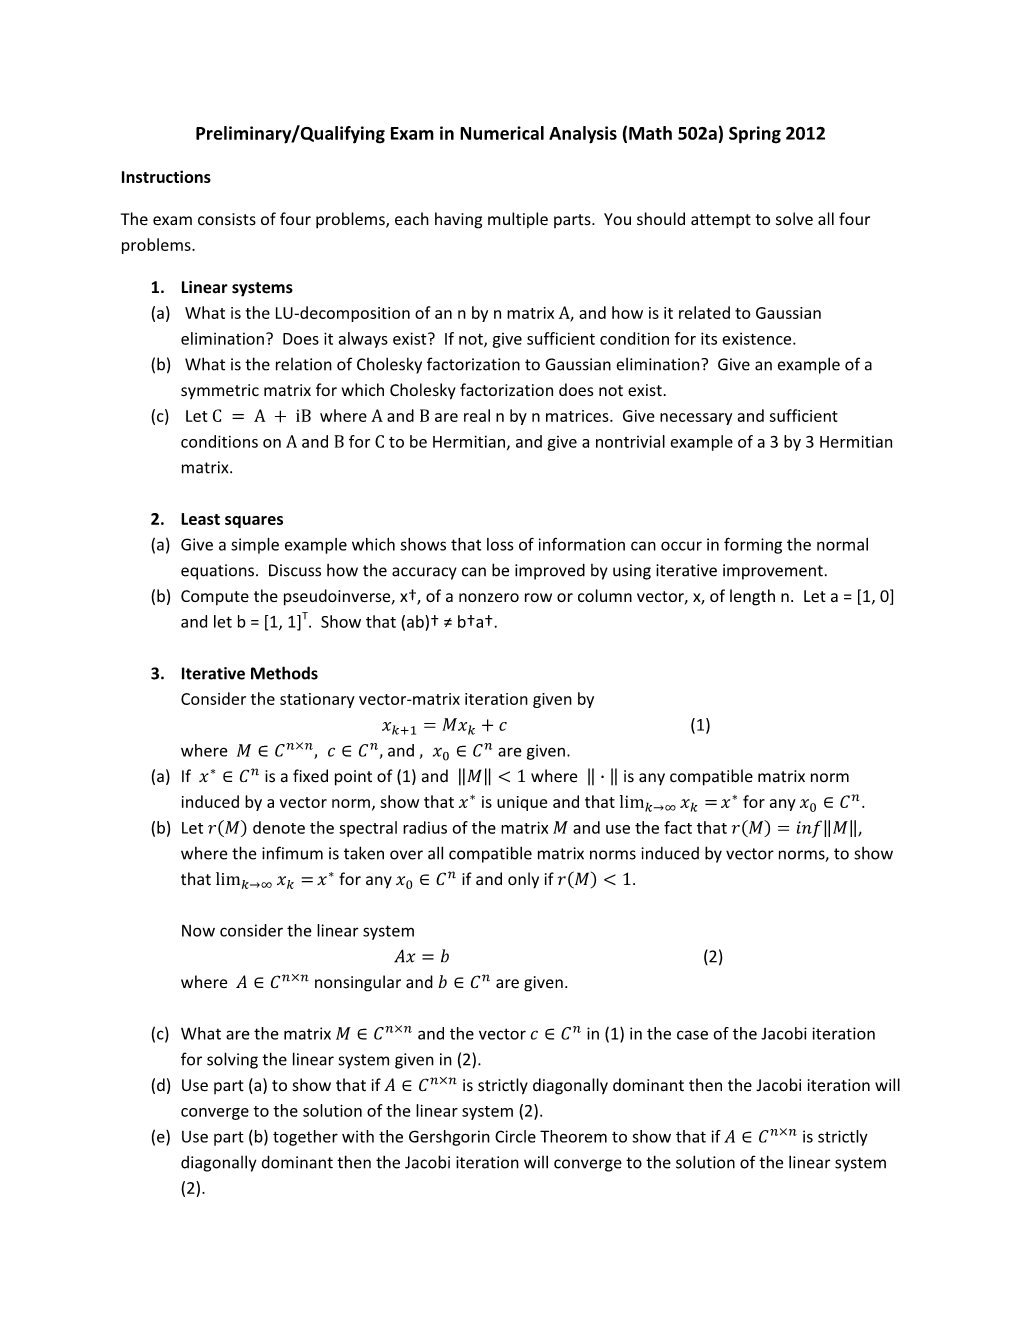 Preliminary/Qualifying Exam in Numerical Analysis (Math 502A) Spring 2012